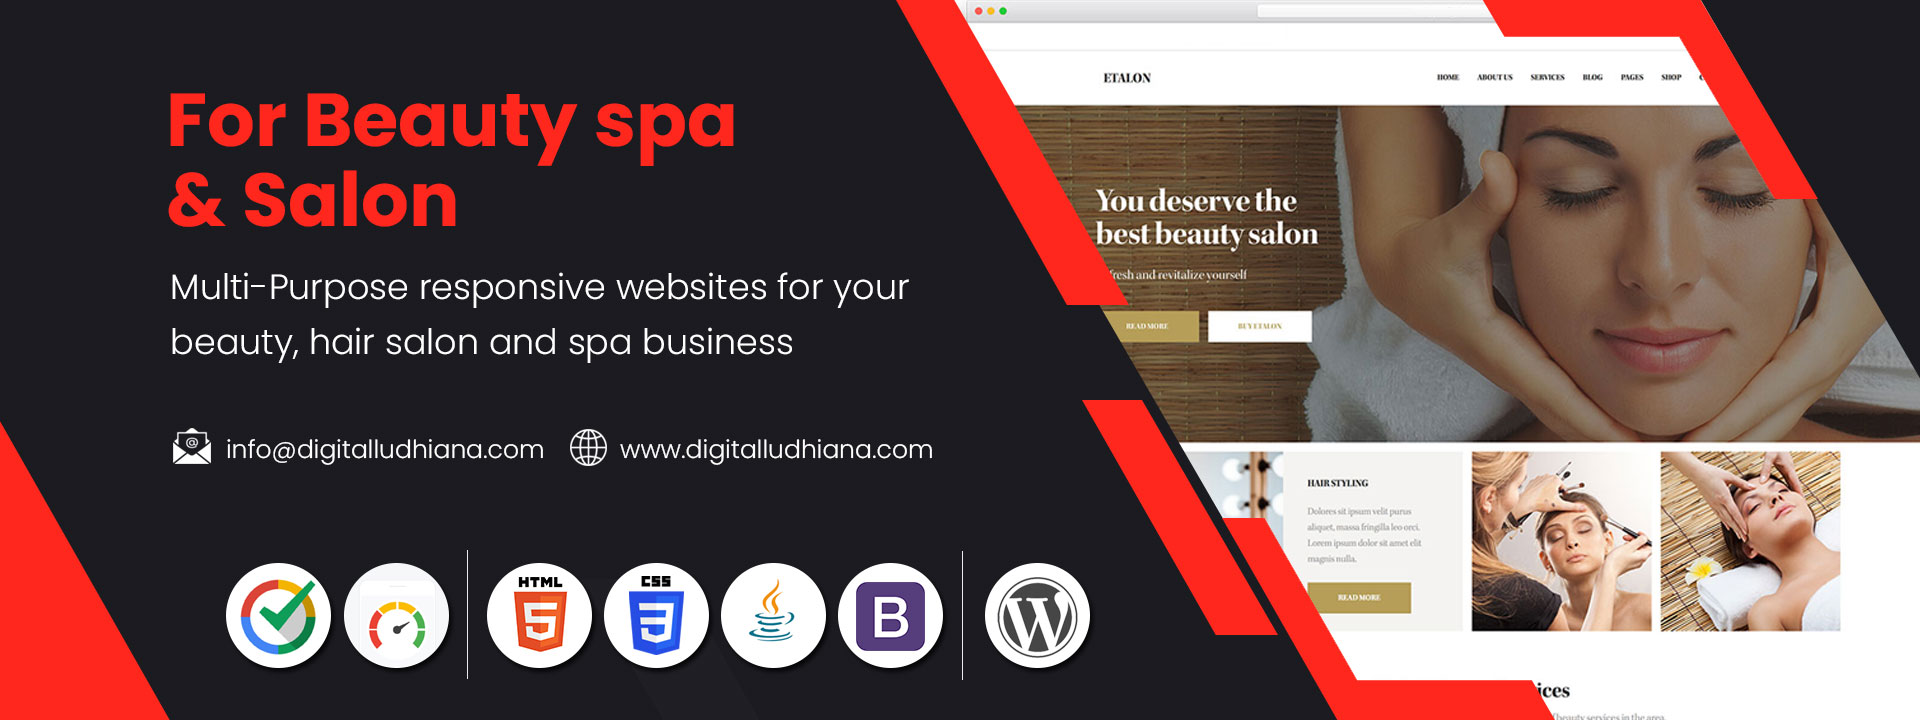 beauty hair salon and spa website designers in ludhiana